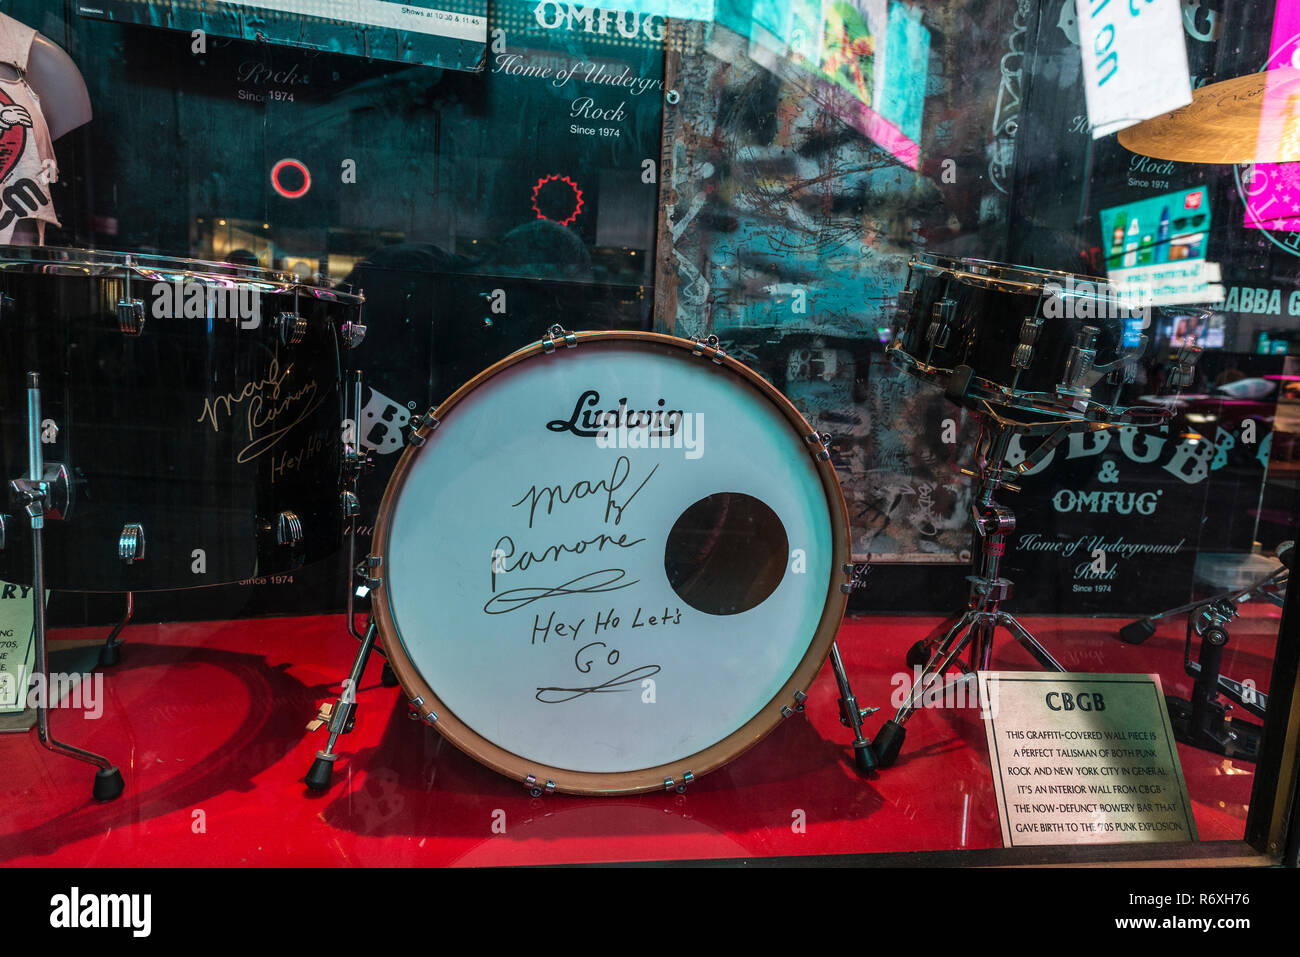 New York City, USA - July 30, 2018: Bass drum signed by Marky Ramone, drummer of the punk rock band the Ramones, in Hard Rock in Times Square at night Stock Photo